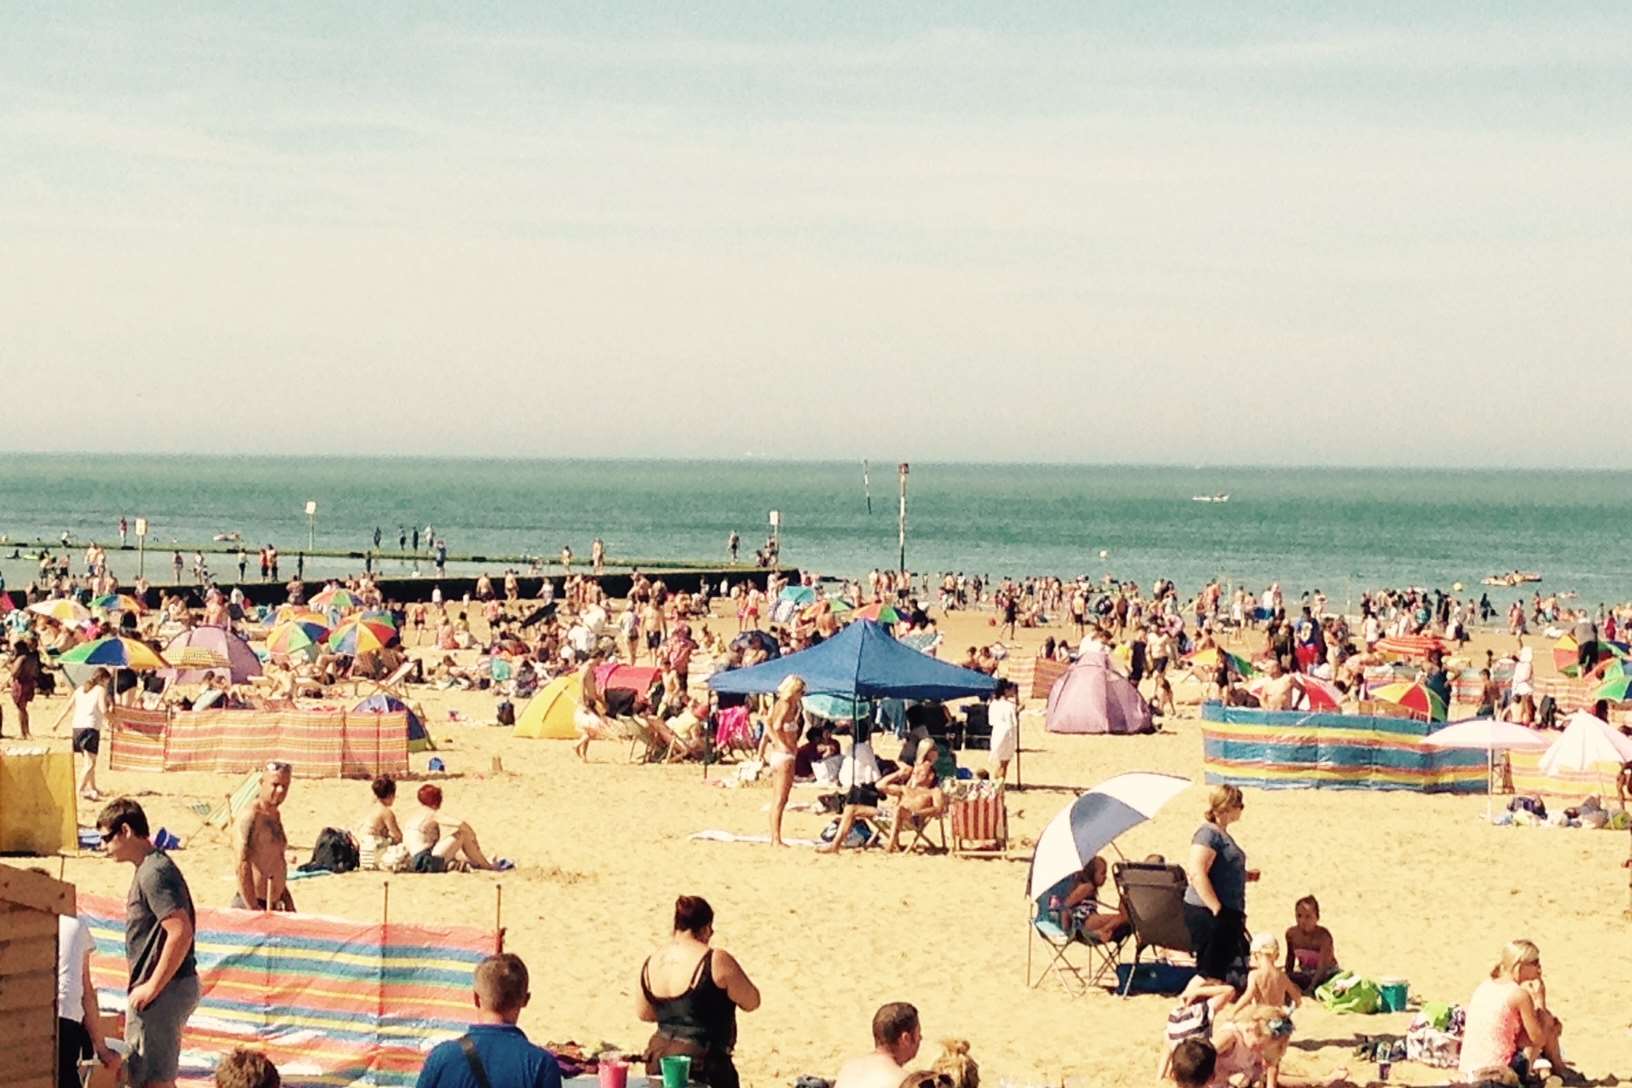 The packed beach at Margate